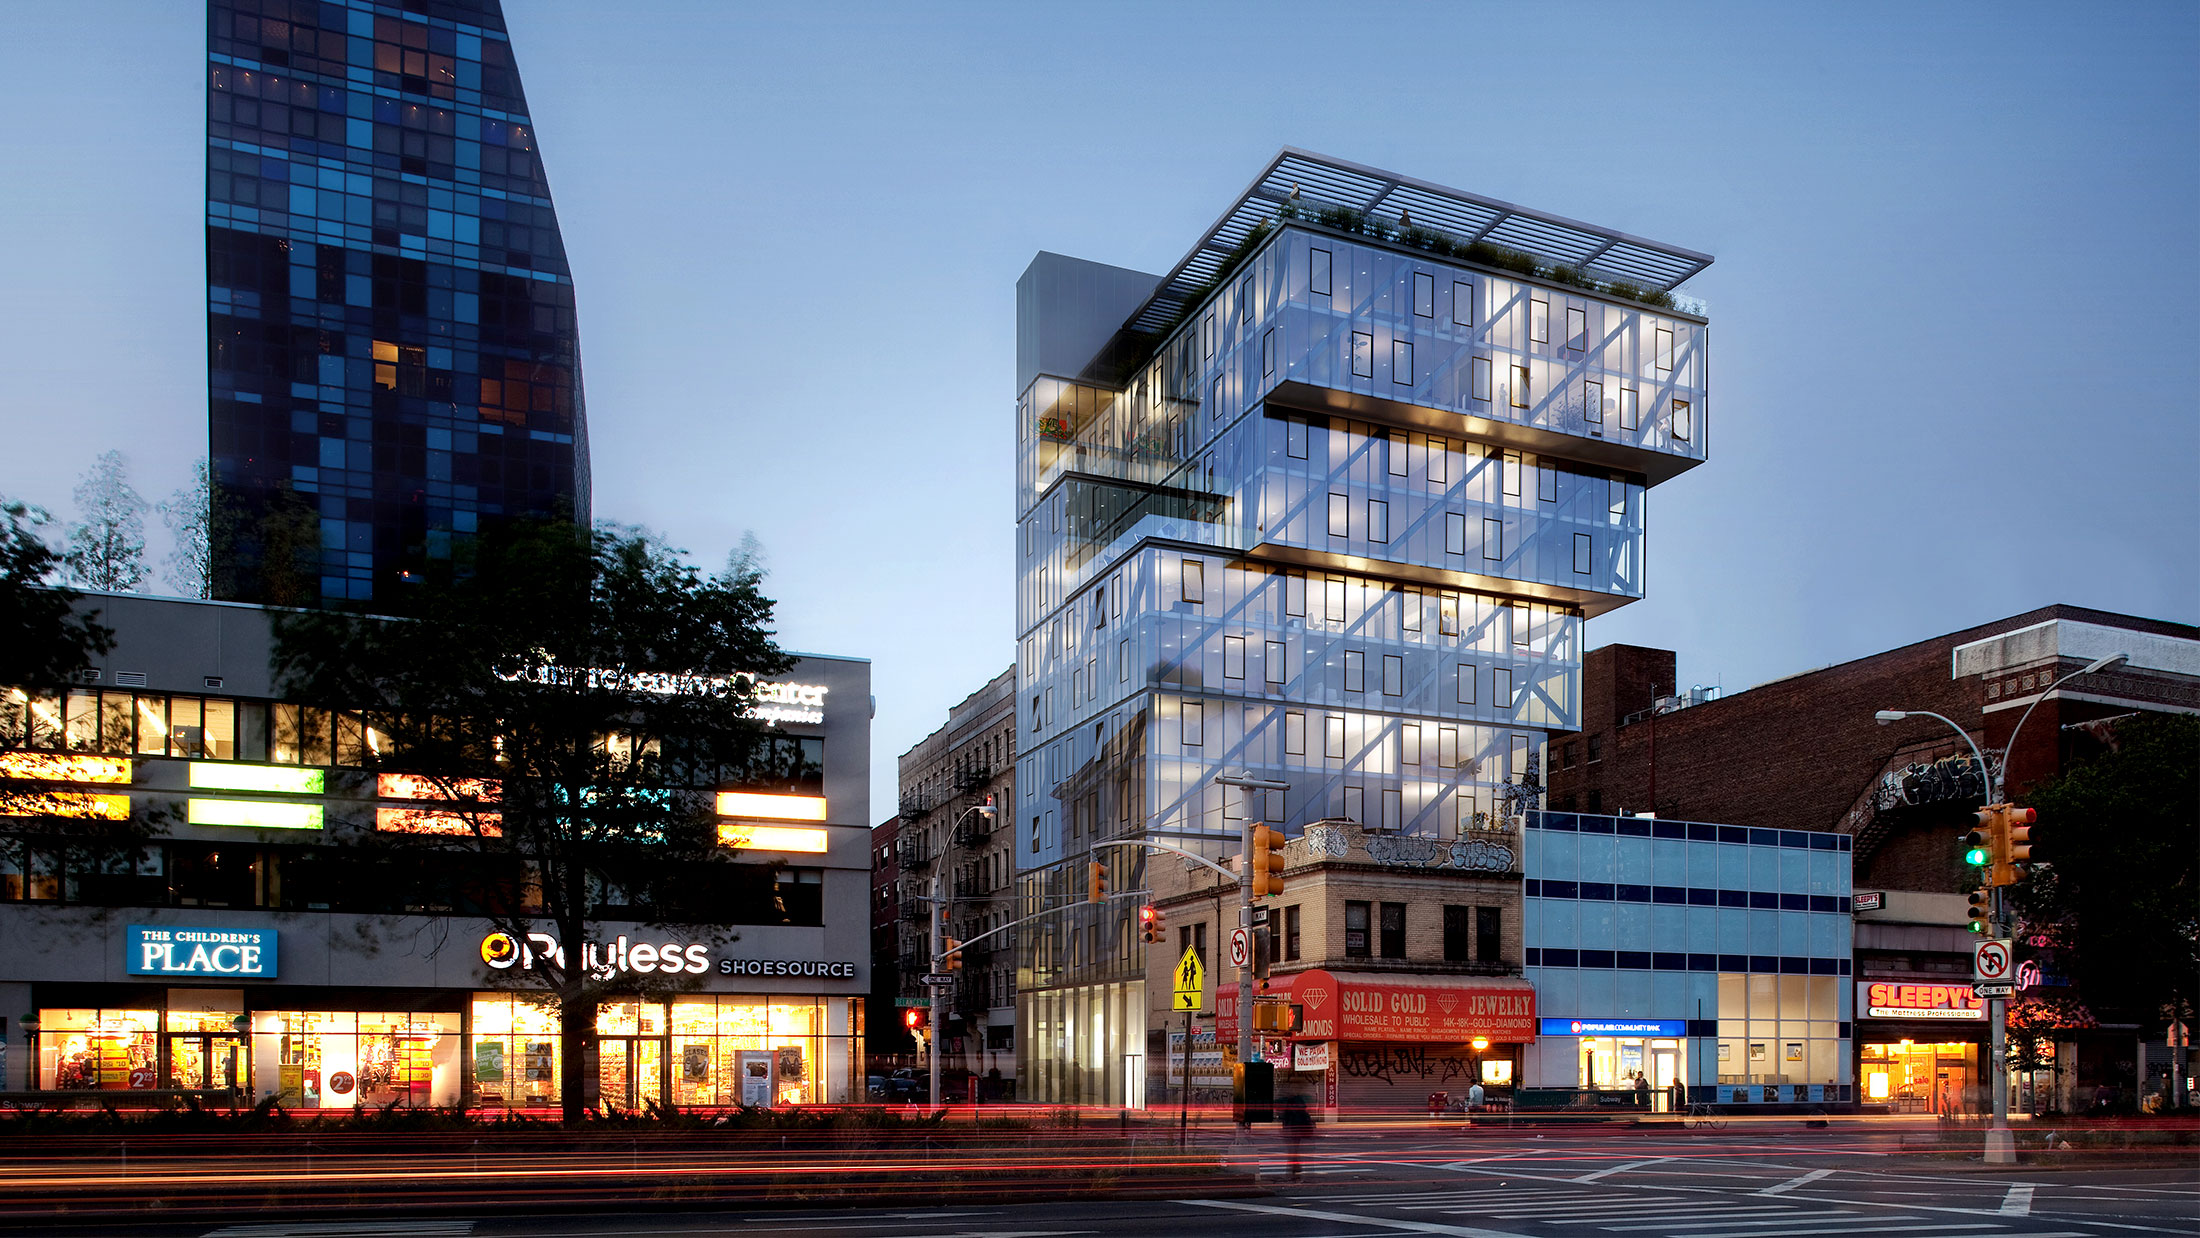 Architectural Rendering of the exterior of the 100 Norfolk Street project located on the Lower East Side, New York City